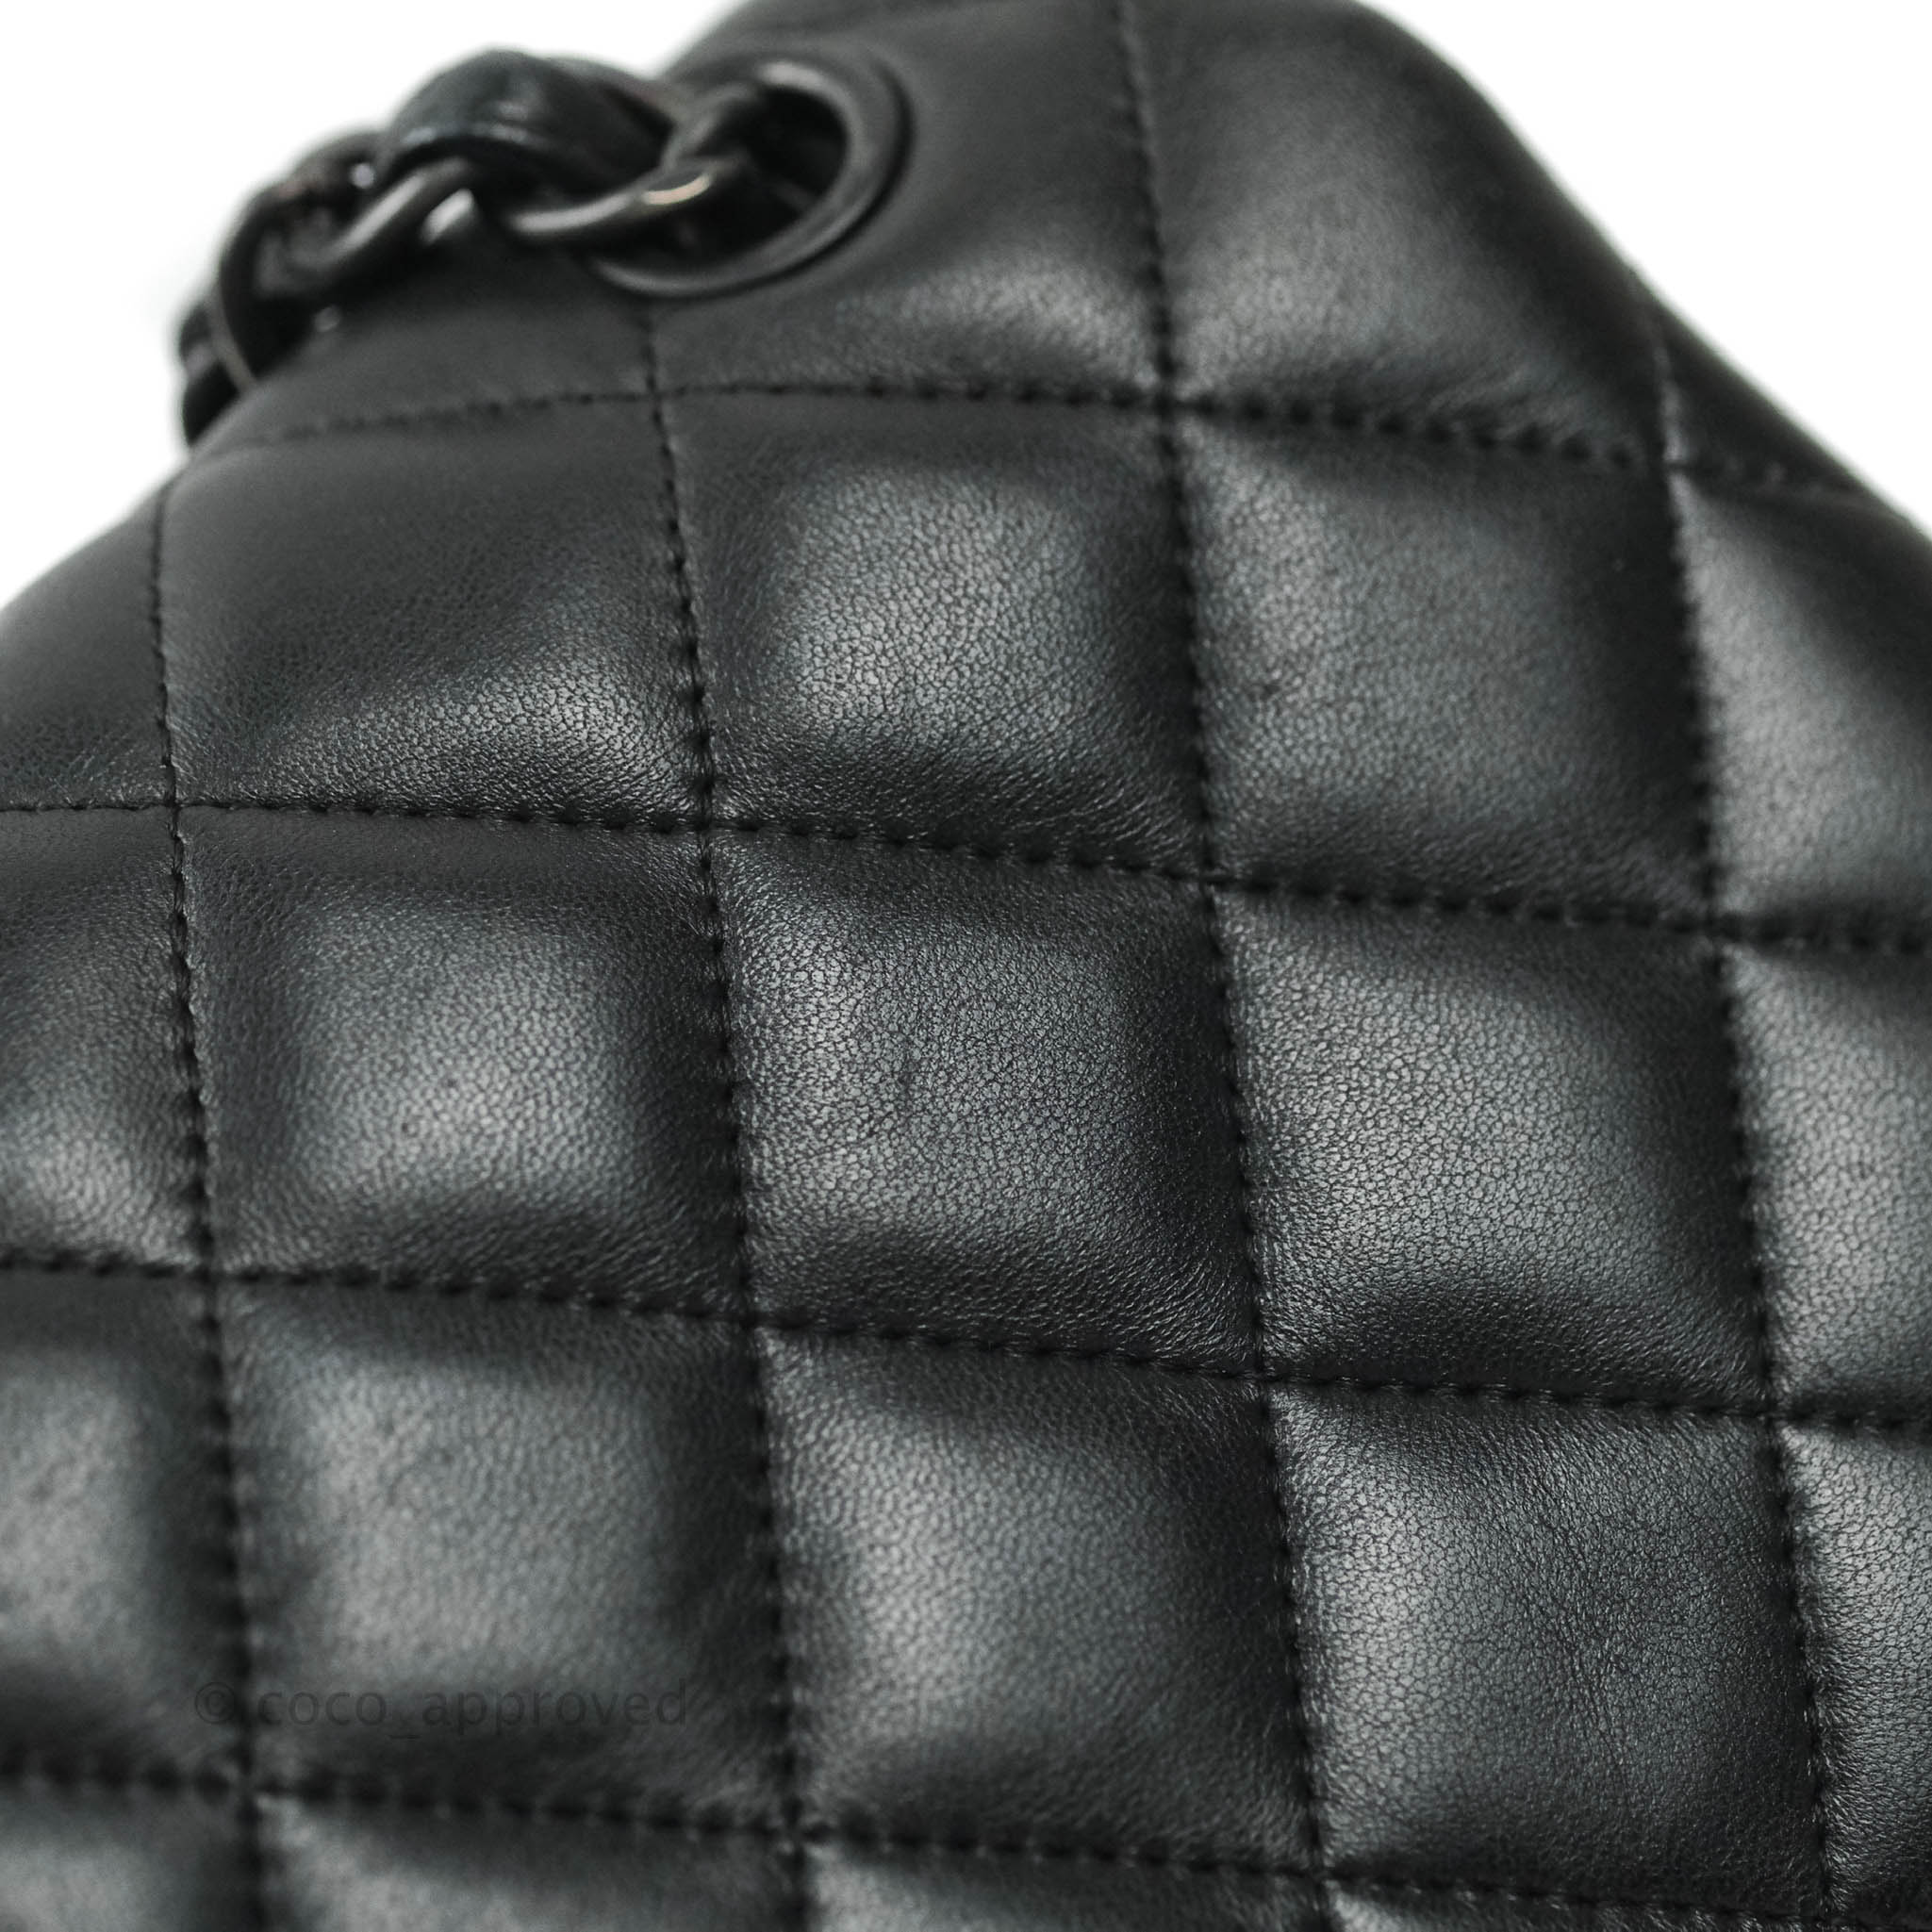 Pre-Owned Chanel Jumbo Classic Double Flap Bag SO Black Lambskin Black –  Madison Avenue Couture